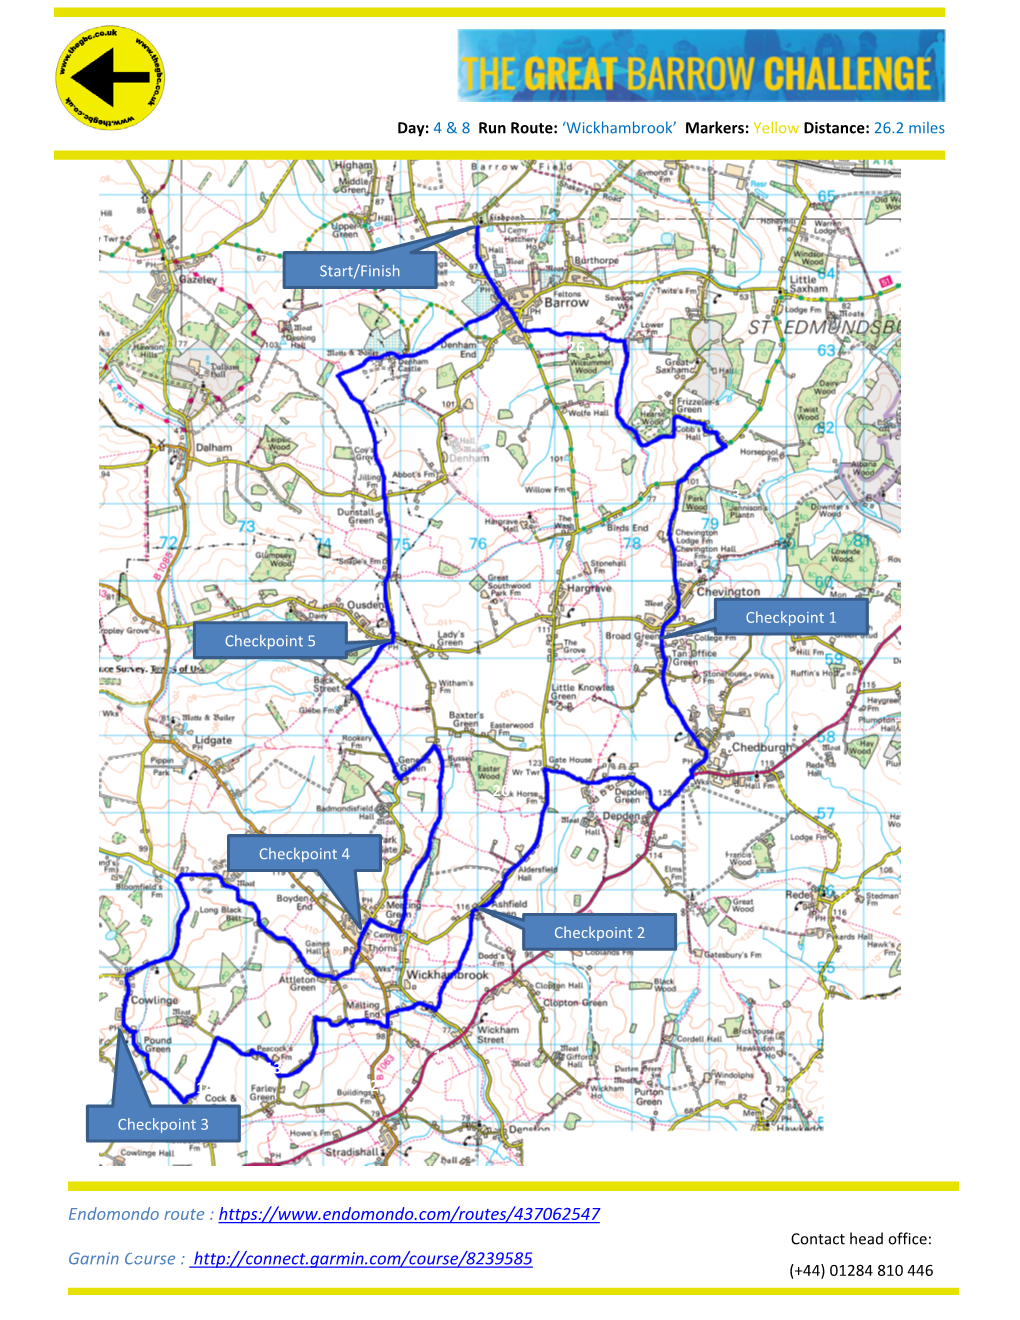 GREAT BARROW CHALLENGE Day: 4 & 8 Run Route: ‘Wickhambrook’ Markers: Yellow Distance: 26.2 Miles